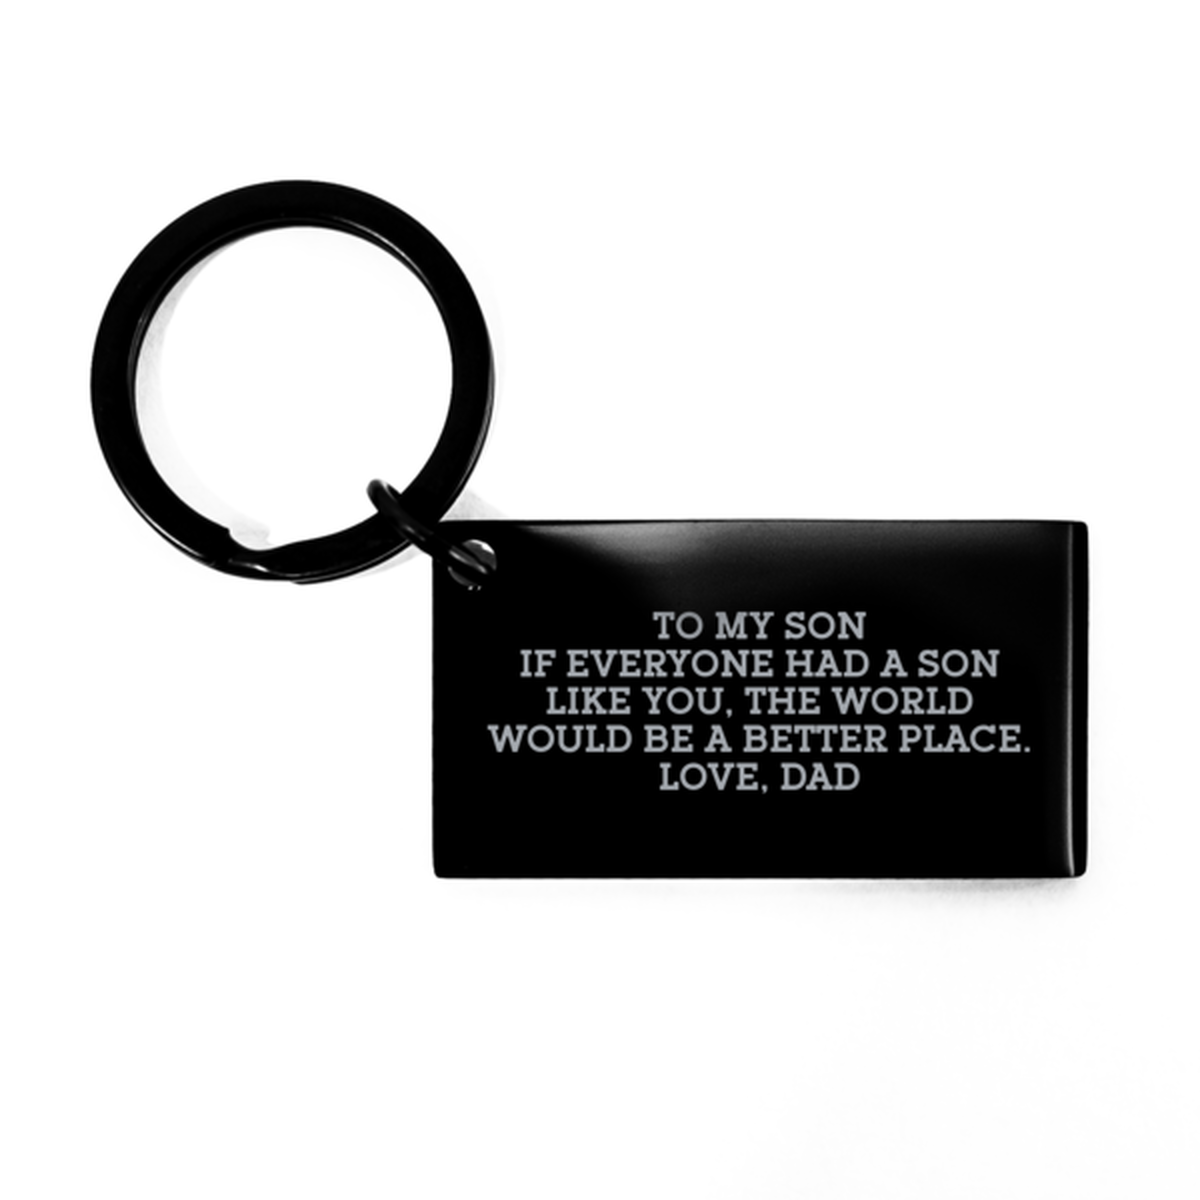 To My Son Black Keychain, If Everyone Had A Son Like You, Graduation Day Gifts For Son From Dad, Birthday Gifts For Men